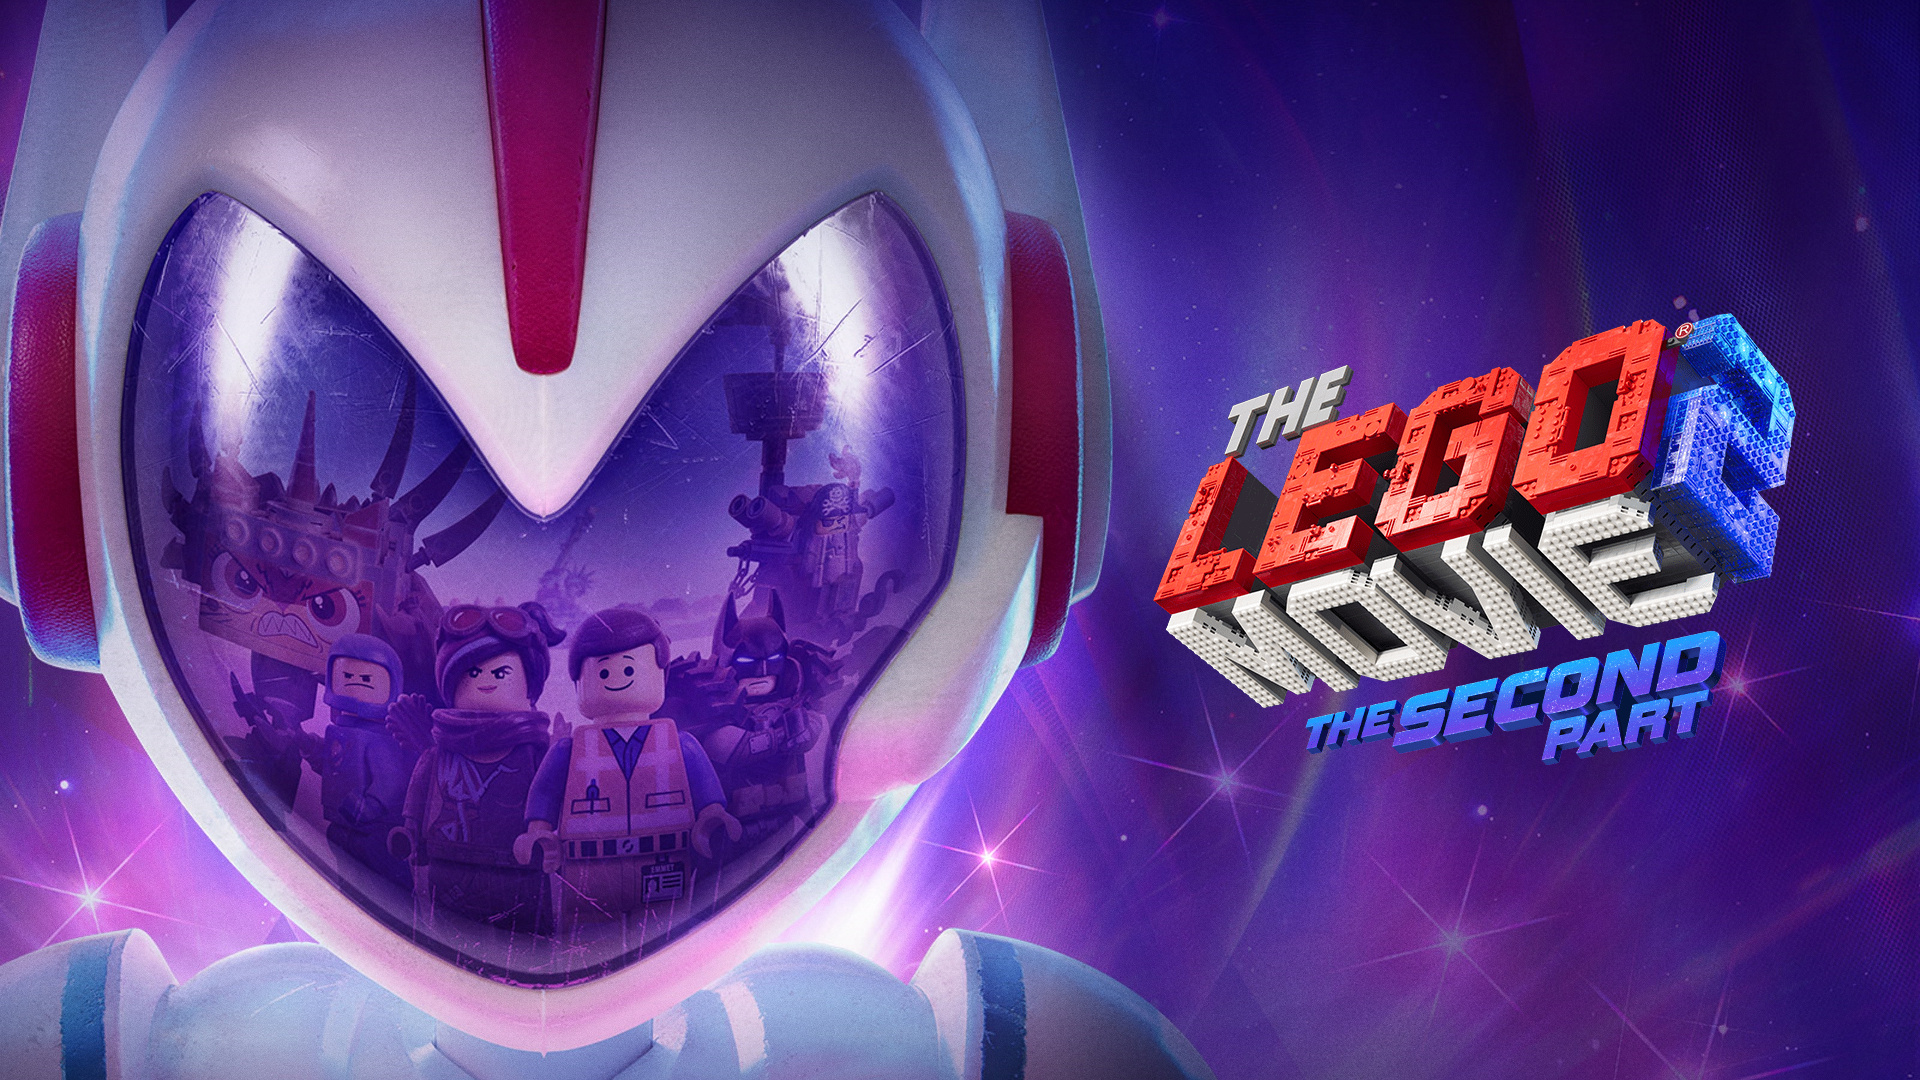 The Lego Movie 2, Movie review, Second part, 1920x1080 Full HD Desktop